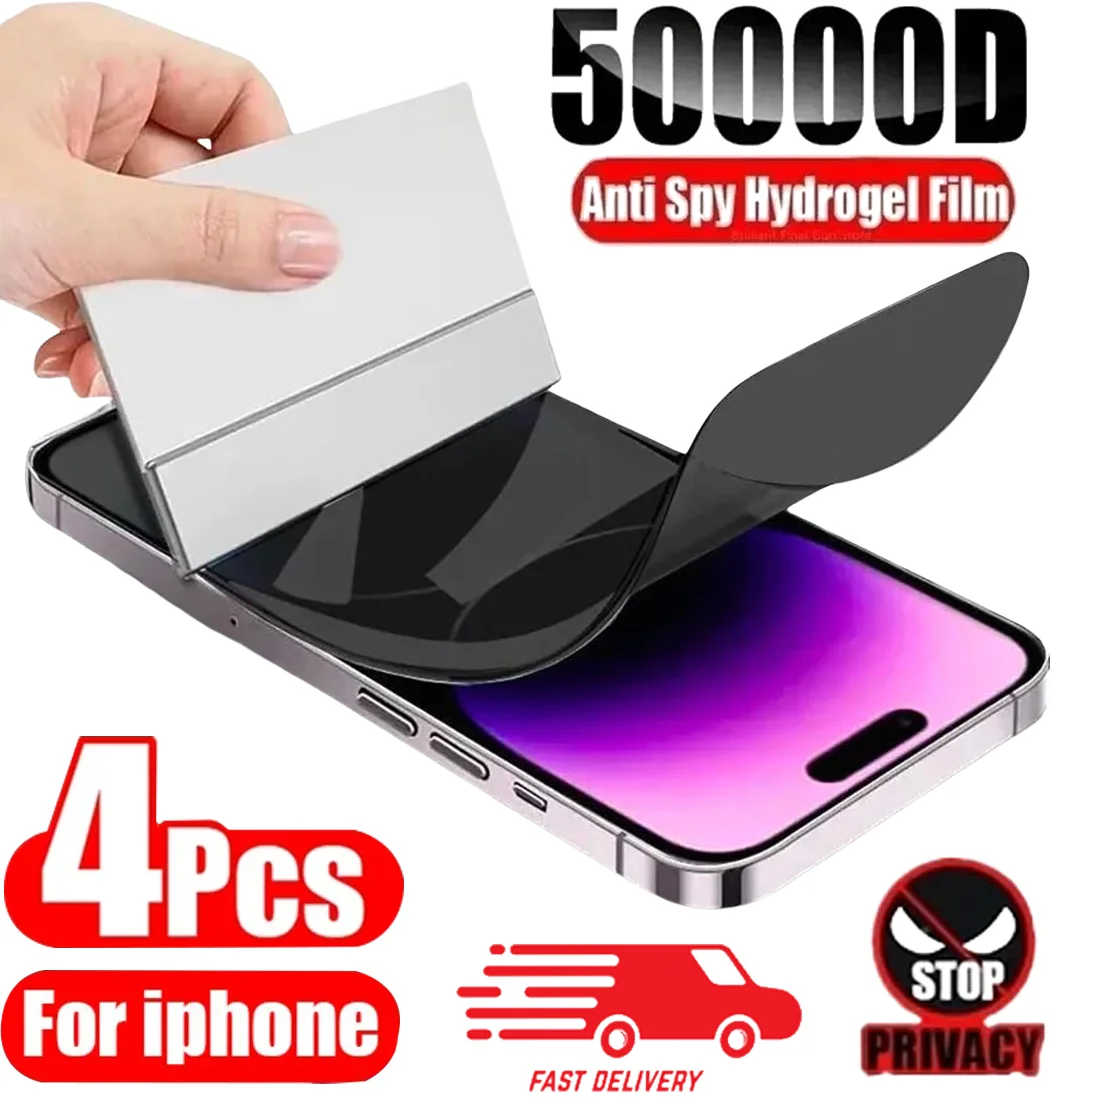 

4Pcs Anti-Spy Hydrogel Film for IPhone 13 14 15 11 12 Pro Max Mini 7 8 Plus Privacy Screen Protector for IPhone XS MAX X XR SE